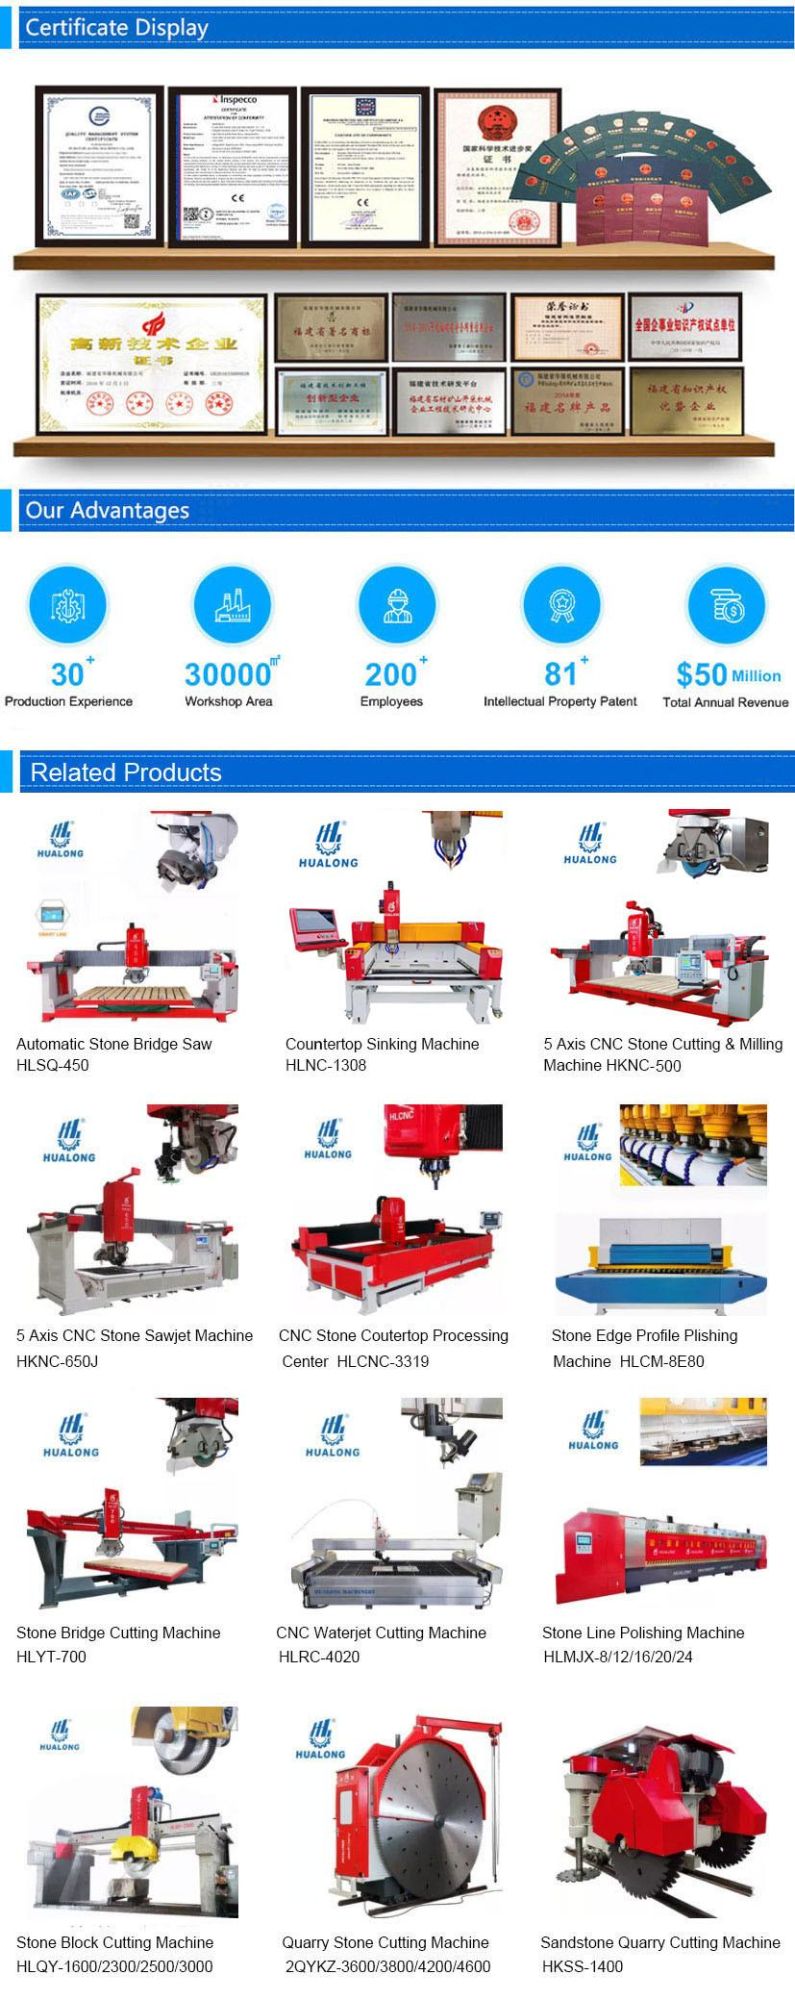 Hualong Machinery Multi-Function 5 Axis CNC Abrasive Water Jet Cutting Machine, Glass Marble Waterjet Cutter with Laser for Stone Metal Aluminum